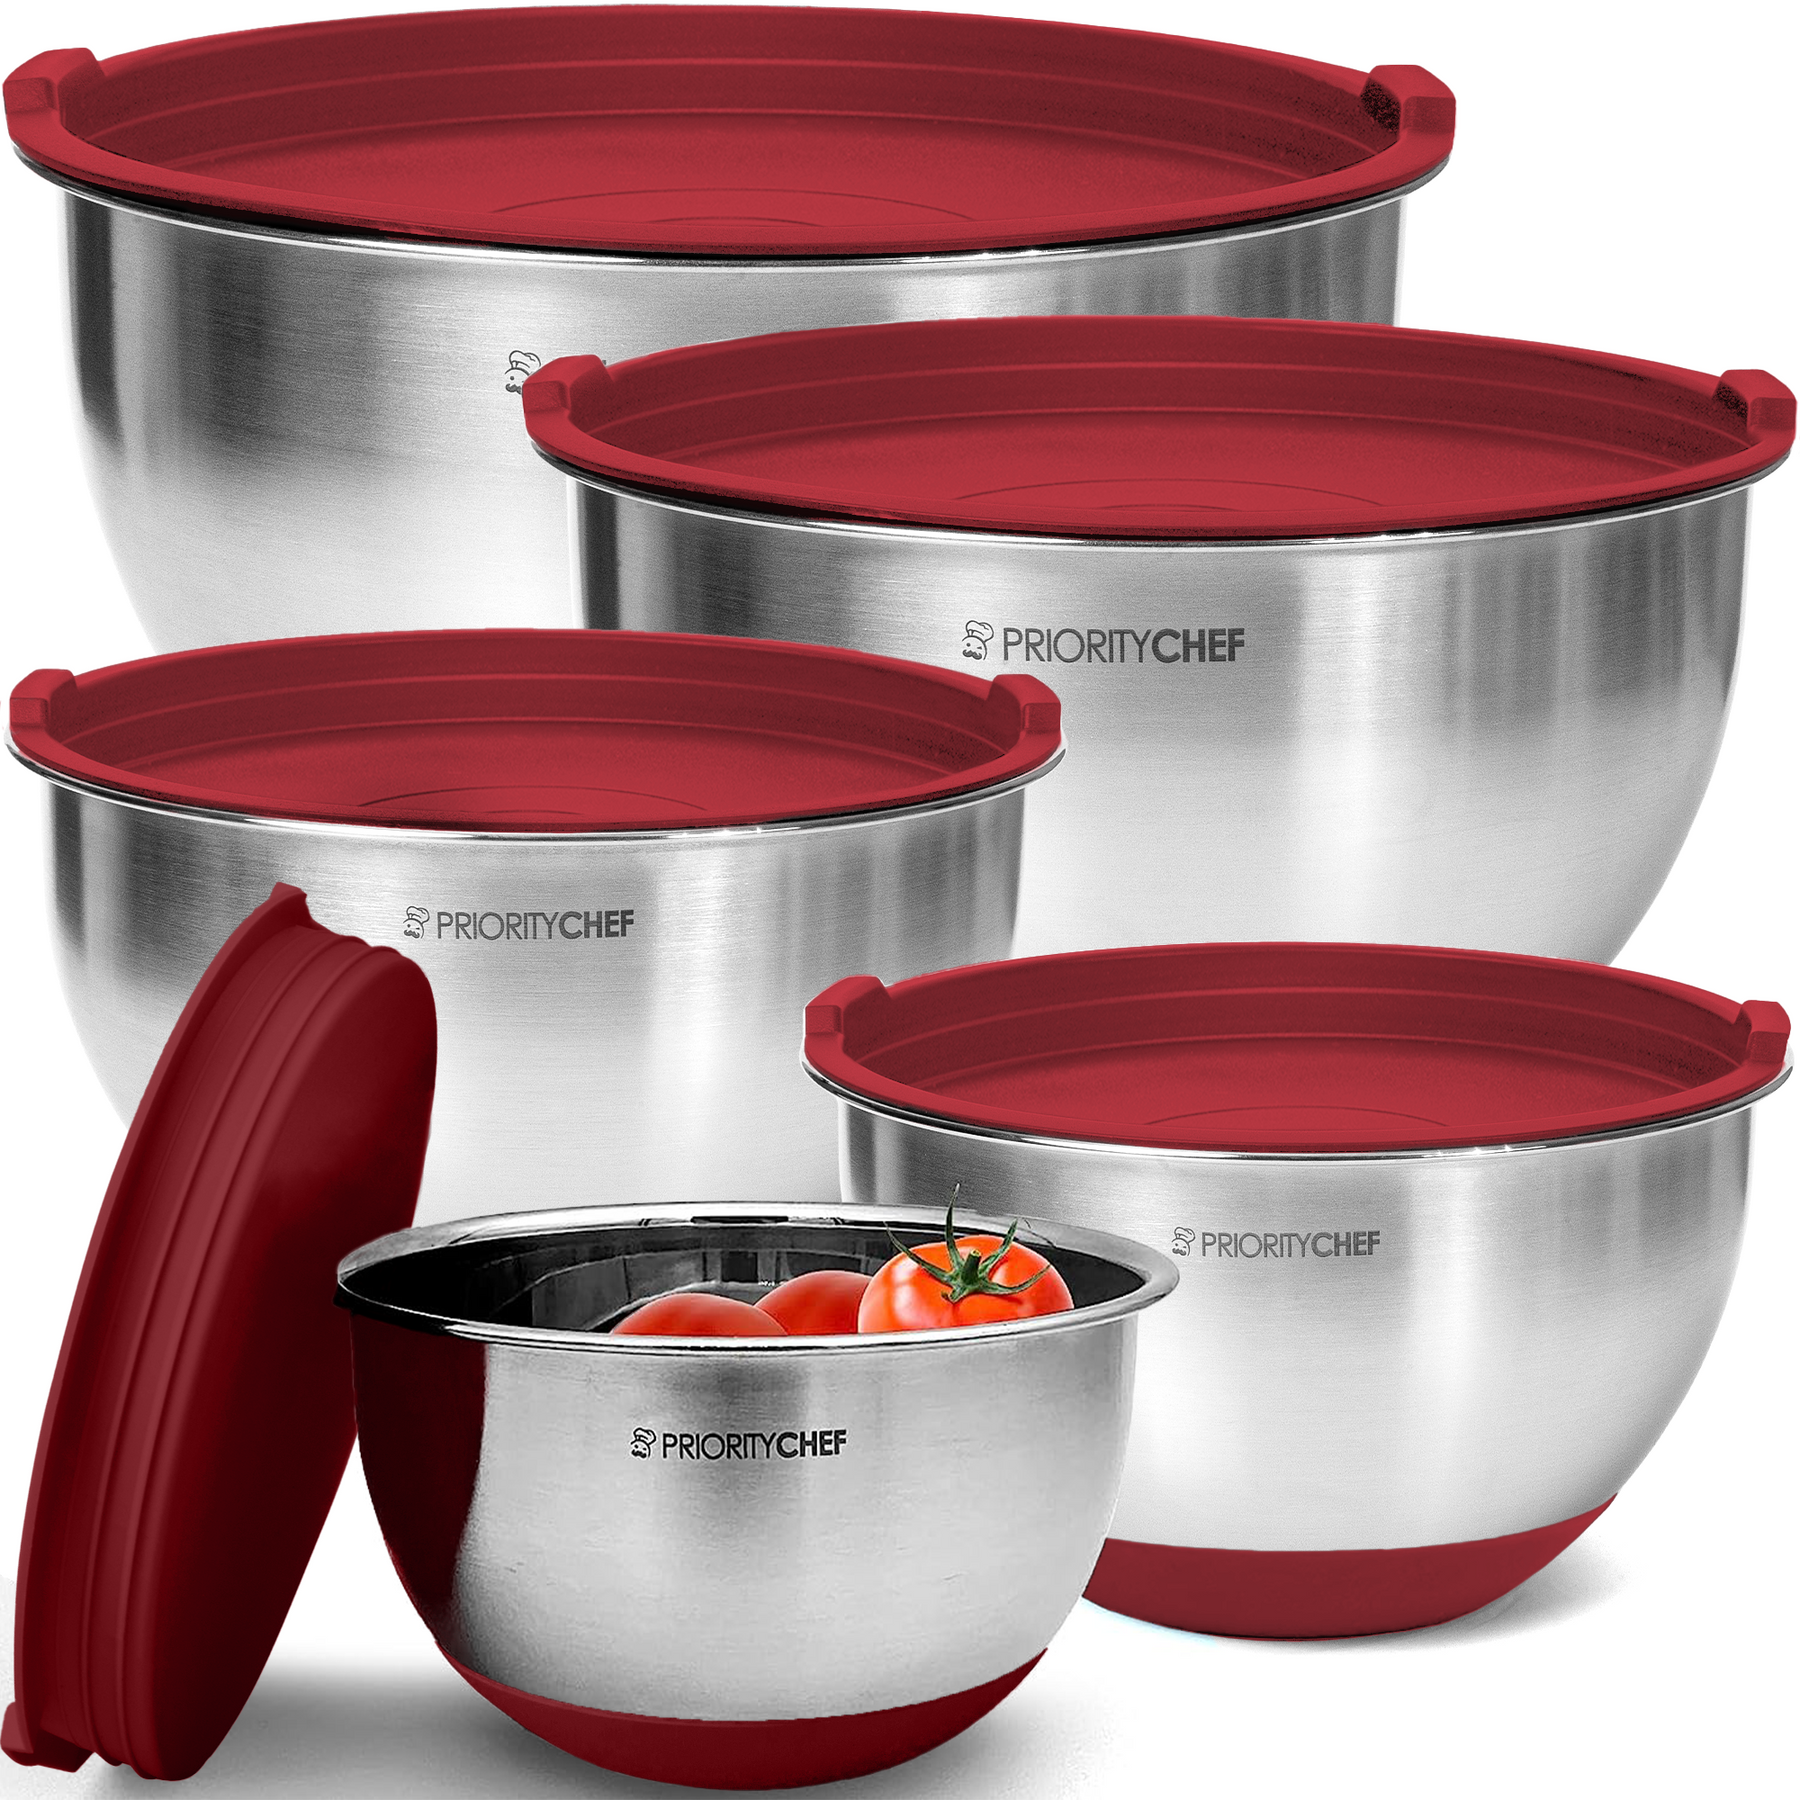 Cuisinart Mixing Bowls, Set of 3 - Red